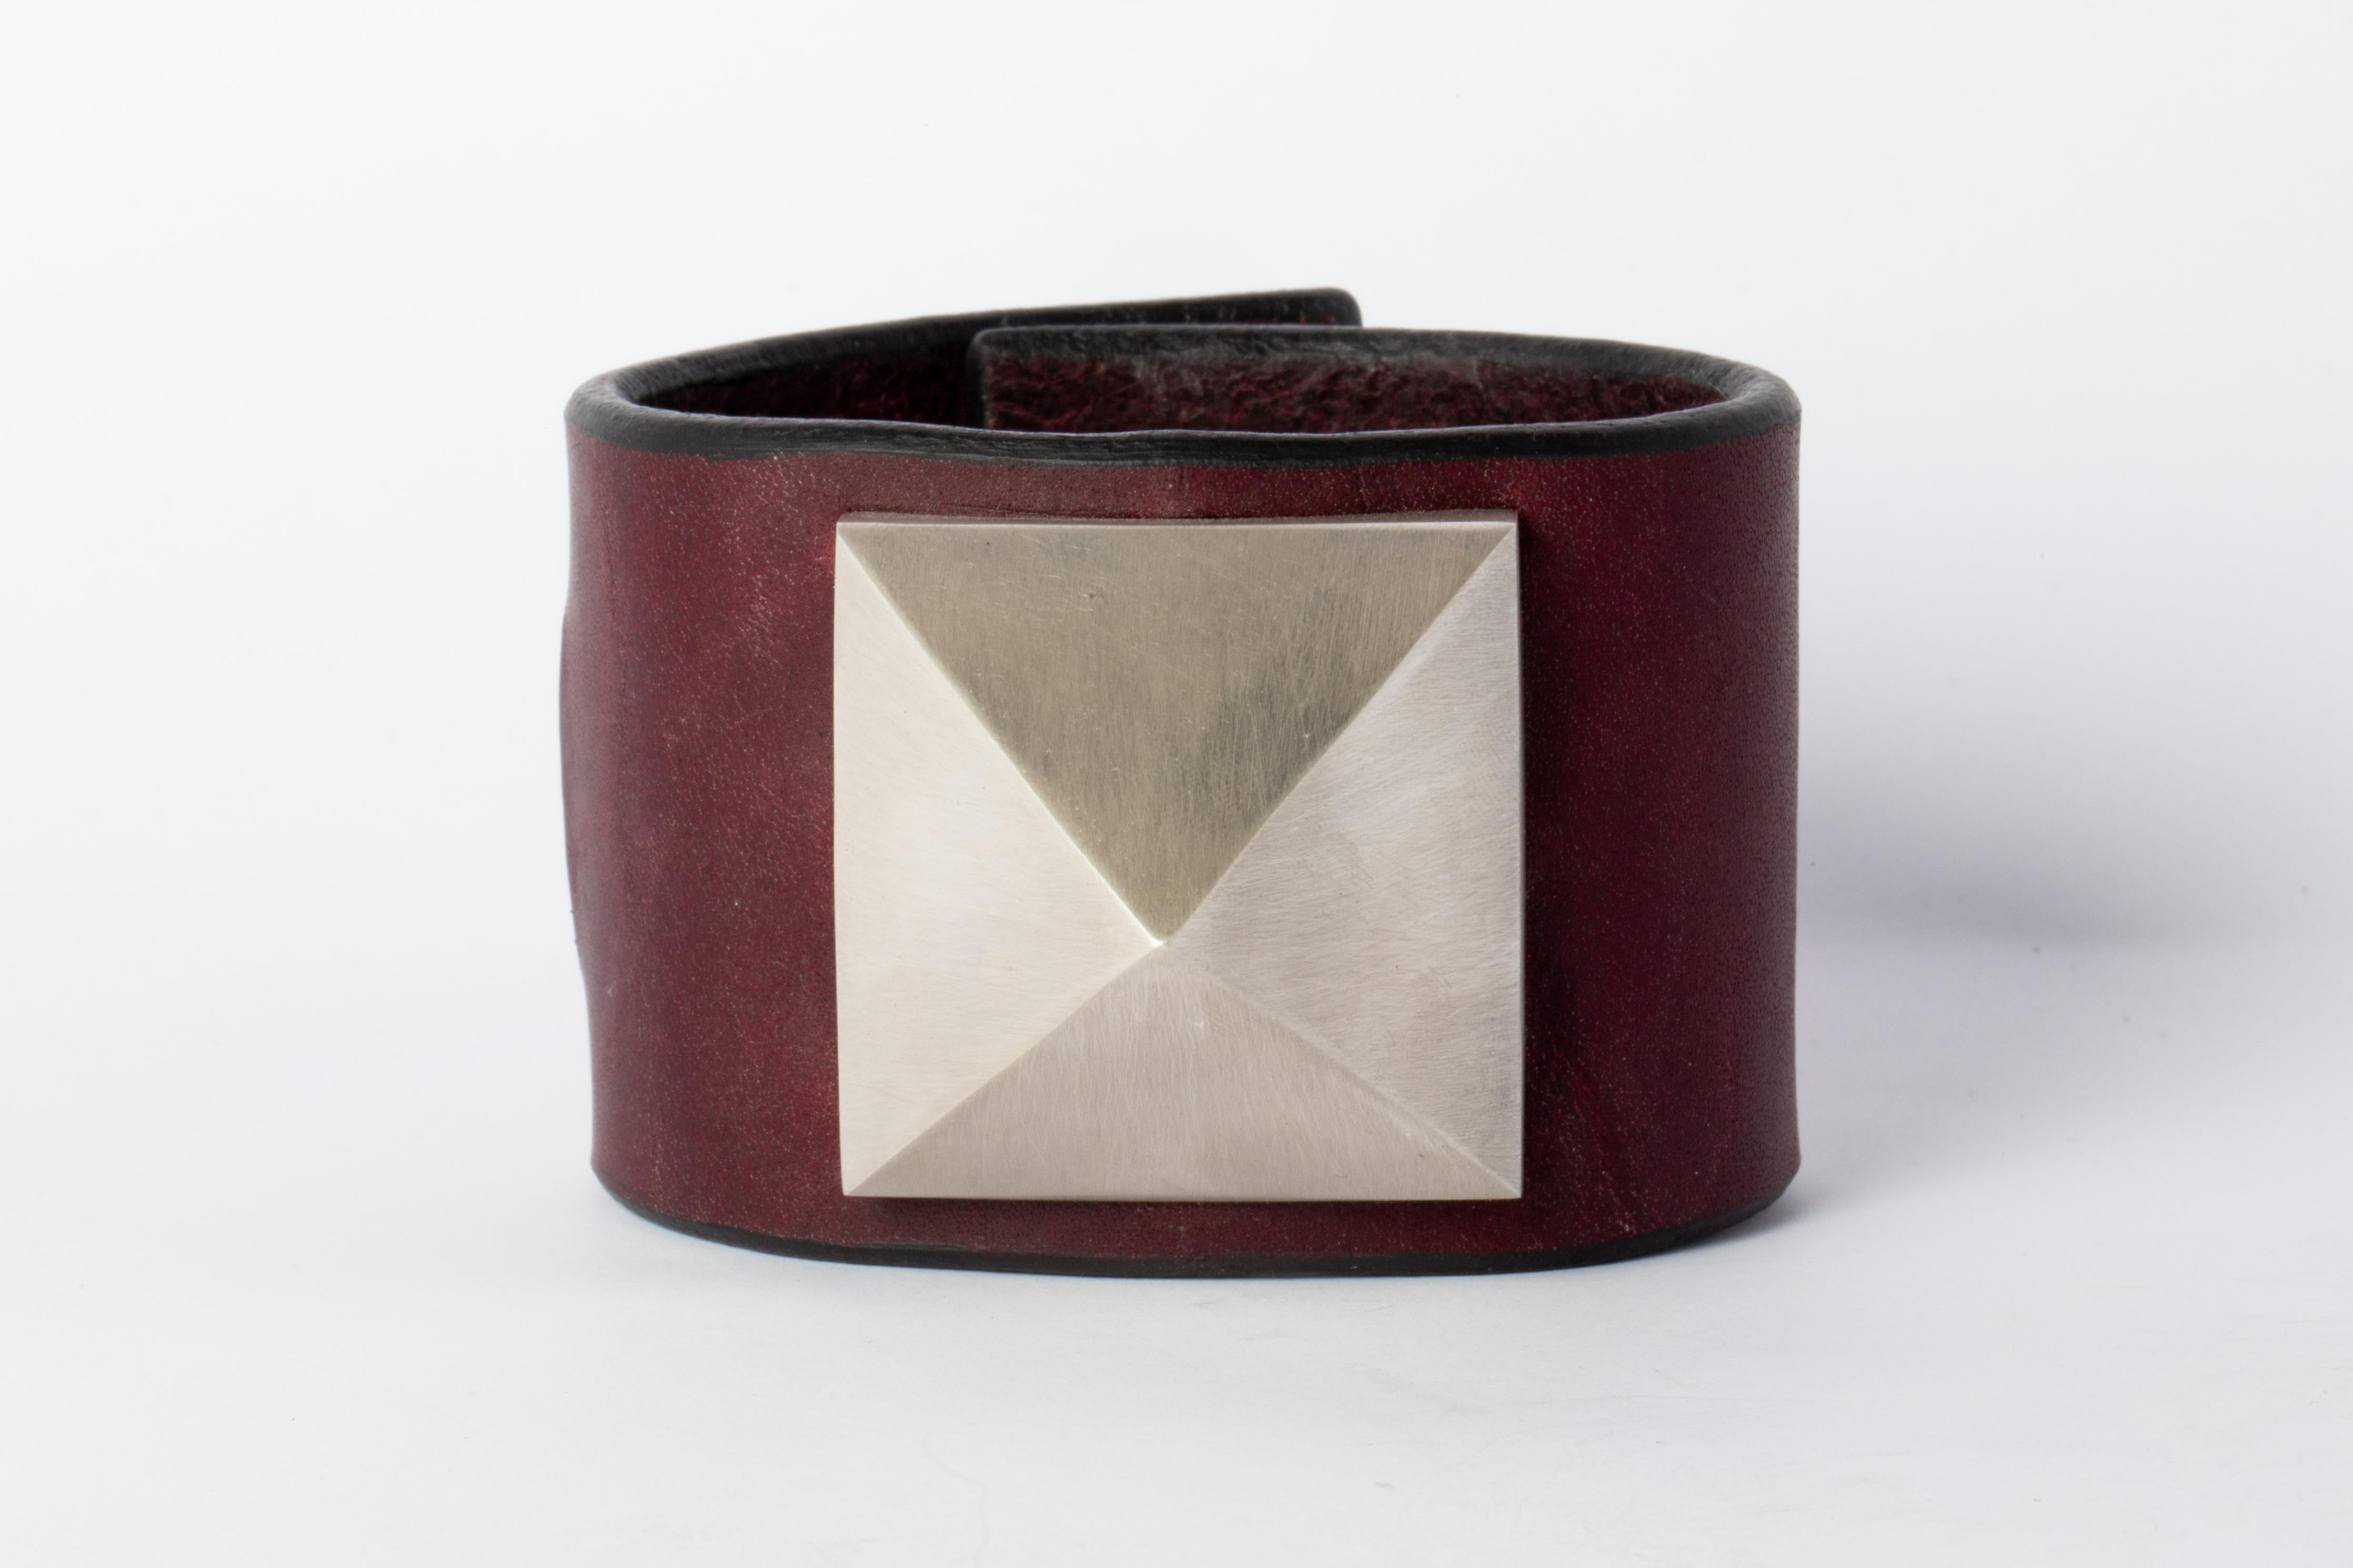 Bracelet in wine buffalo leather and electroplated brass with silver and then dipped into acid to create the subtly destroyed surface. Items with the potential use as restraints. All P4X hardware and accessories are compatible and interchangeable.